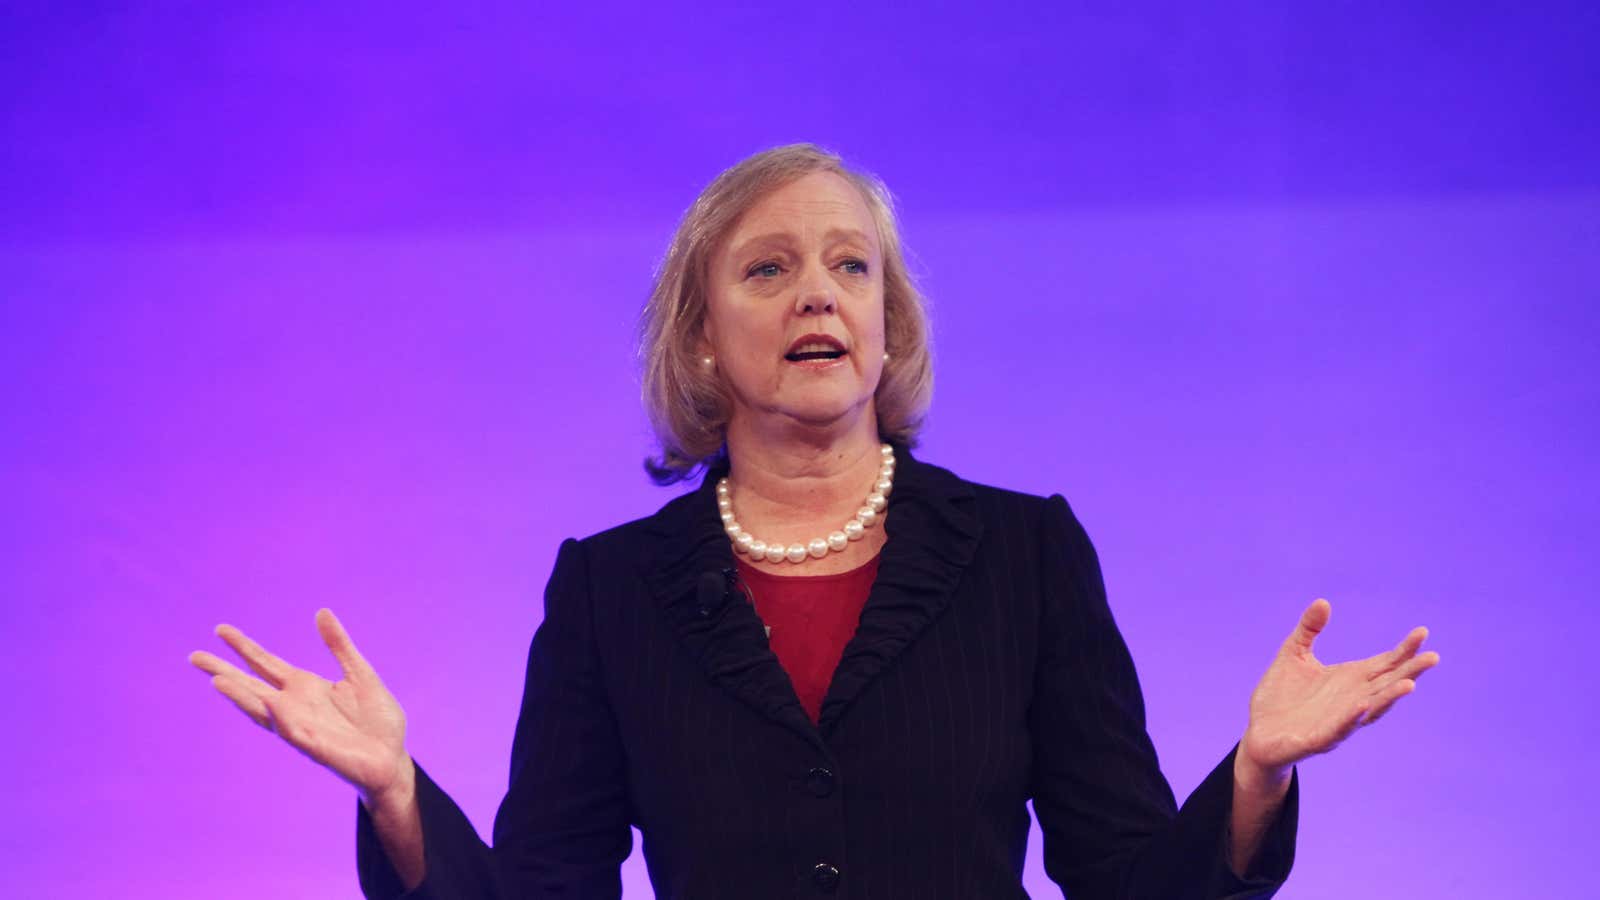 HP (Hewlett-Packard) CEO Meg Whitman delivers a speech during the HP World Tour in Beijing, China, 25 June 2013. HP CEO Meg Whitman stressed her…